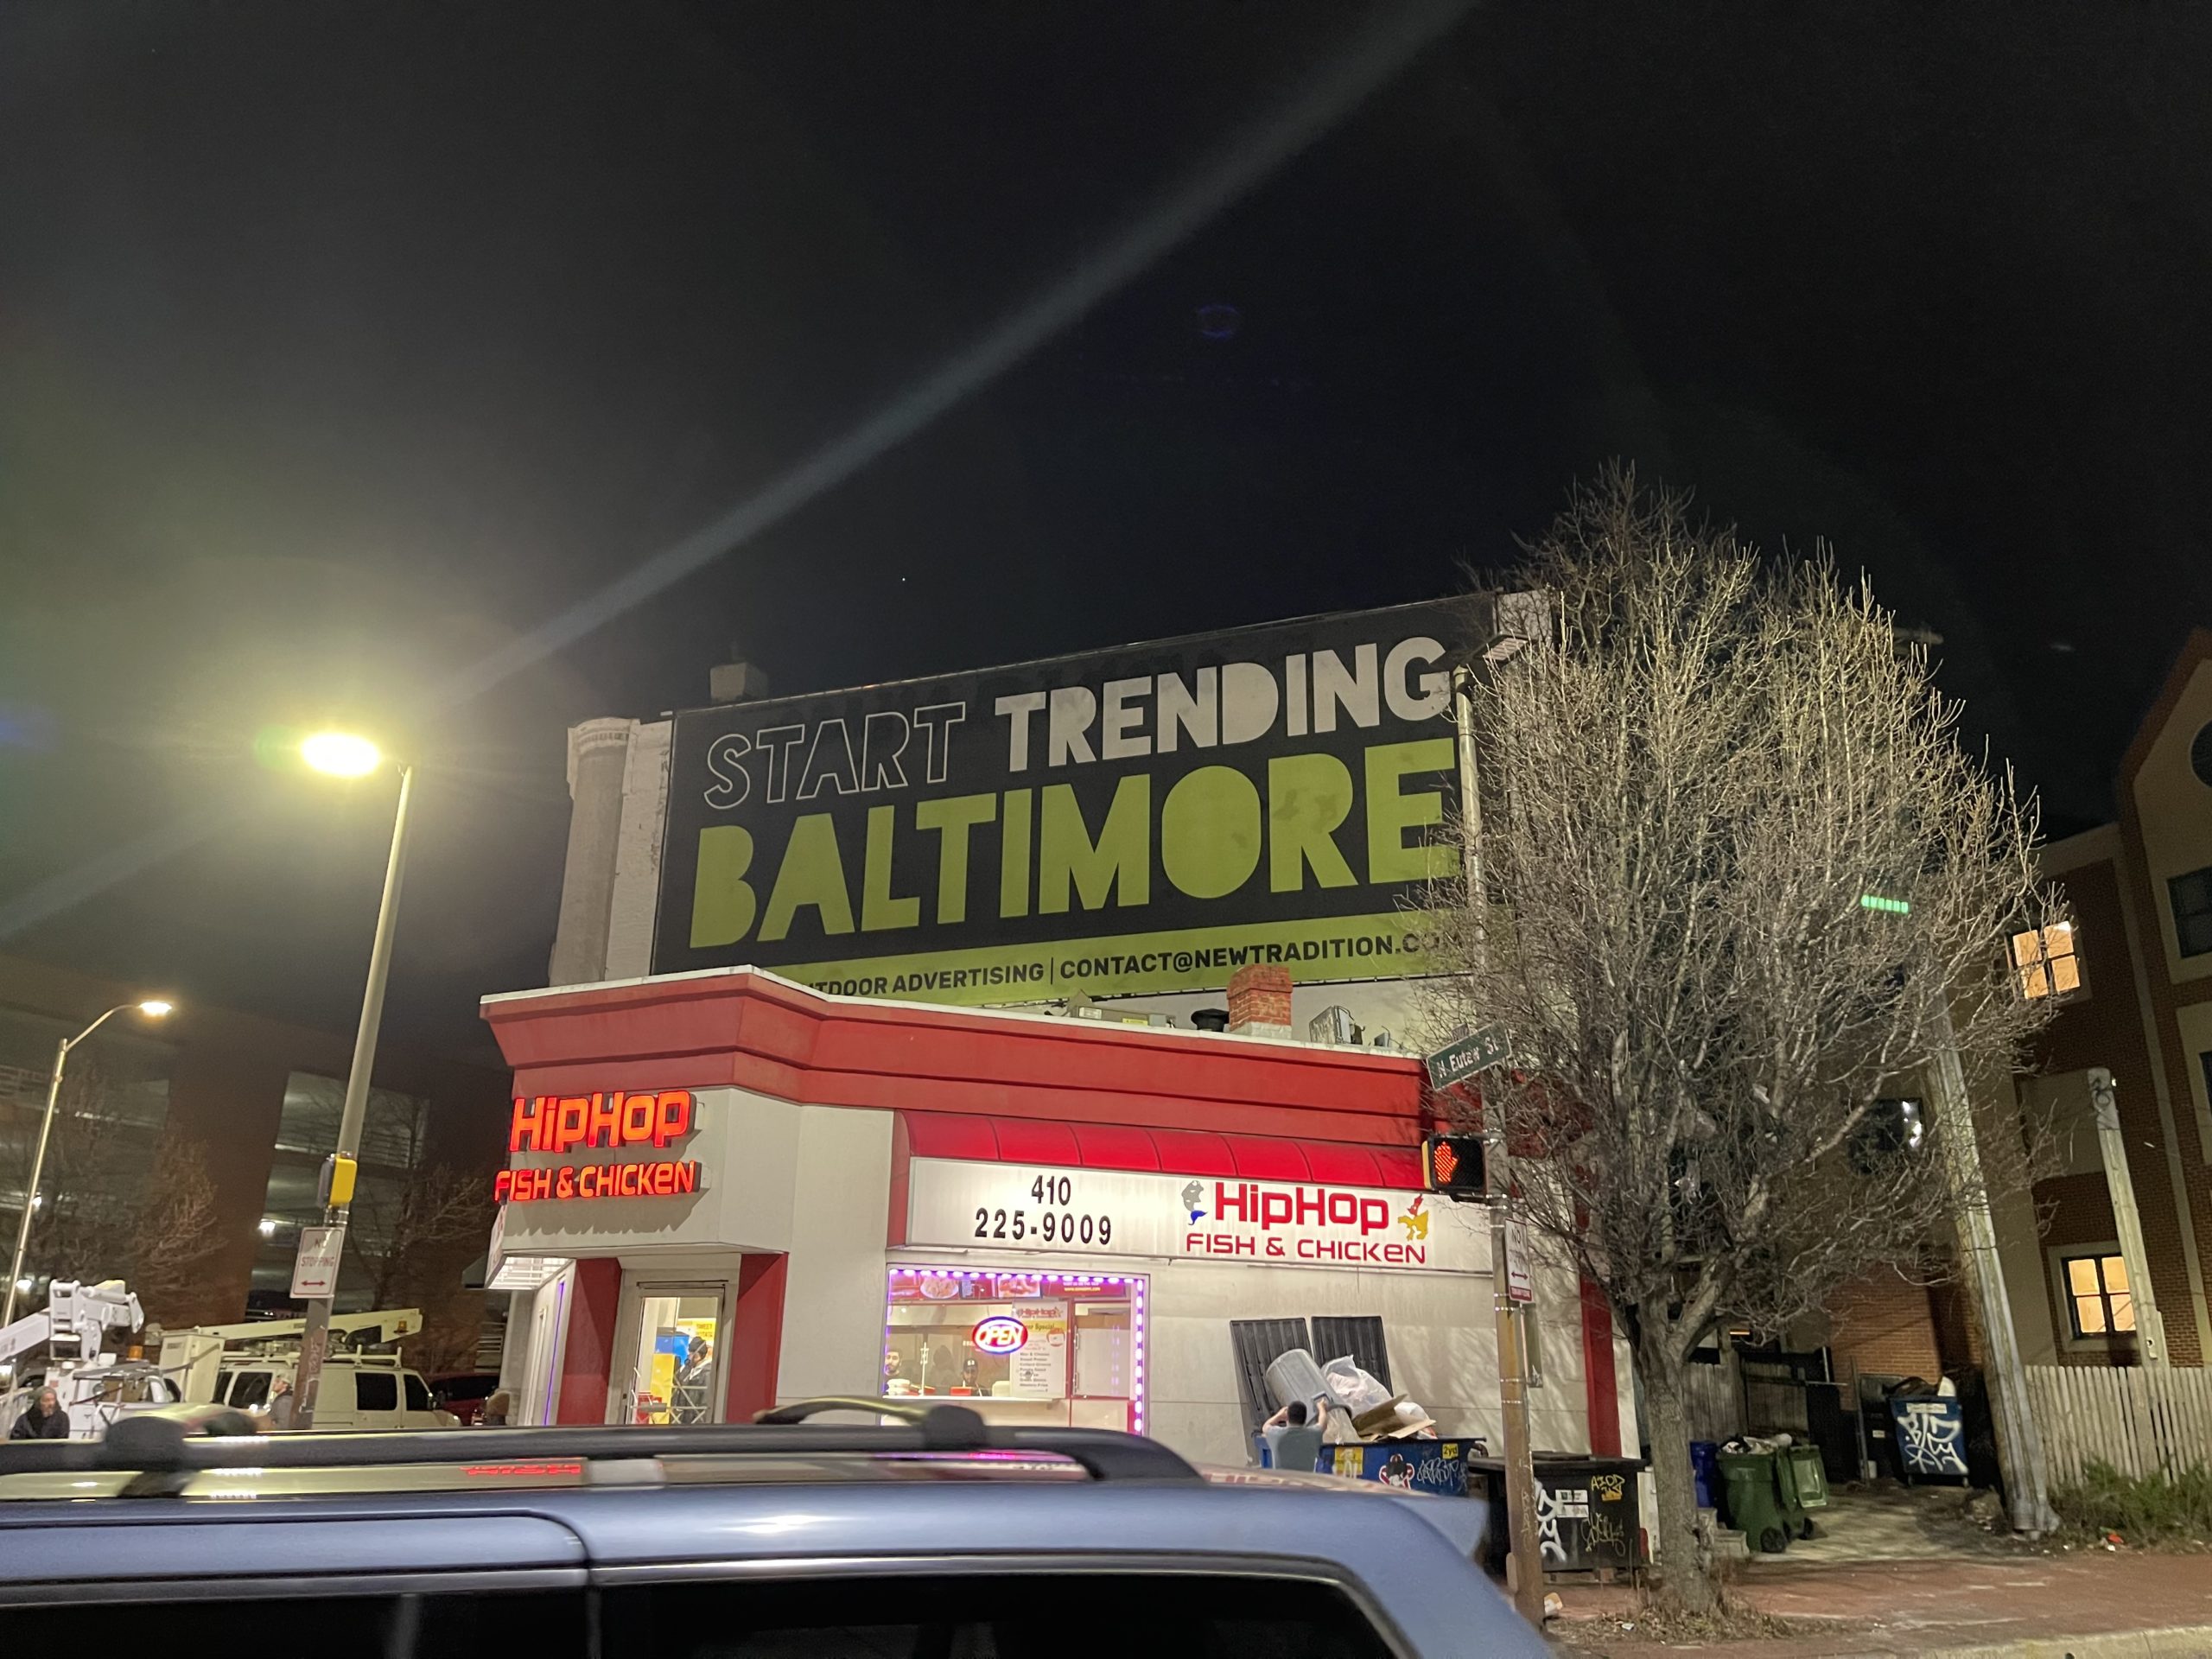 Baltimore-Signs-Graphics-16-x-40-lind-bannerframe-classic-banner-installation-picture-2-scaled Is It Time Your Banners Start Trending?